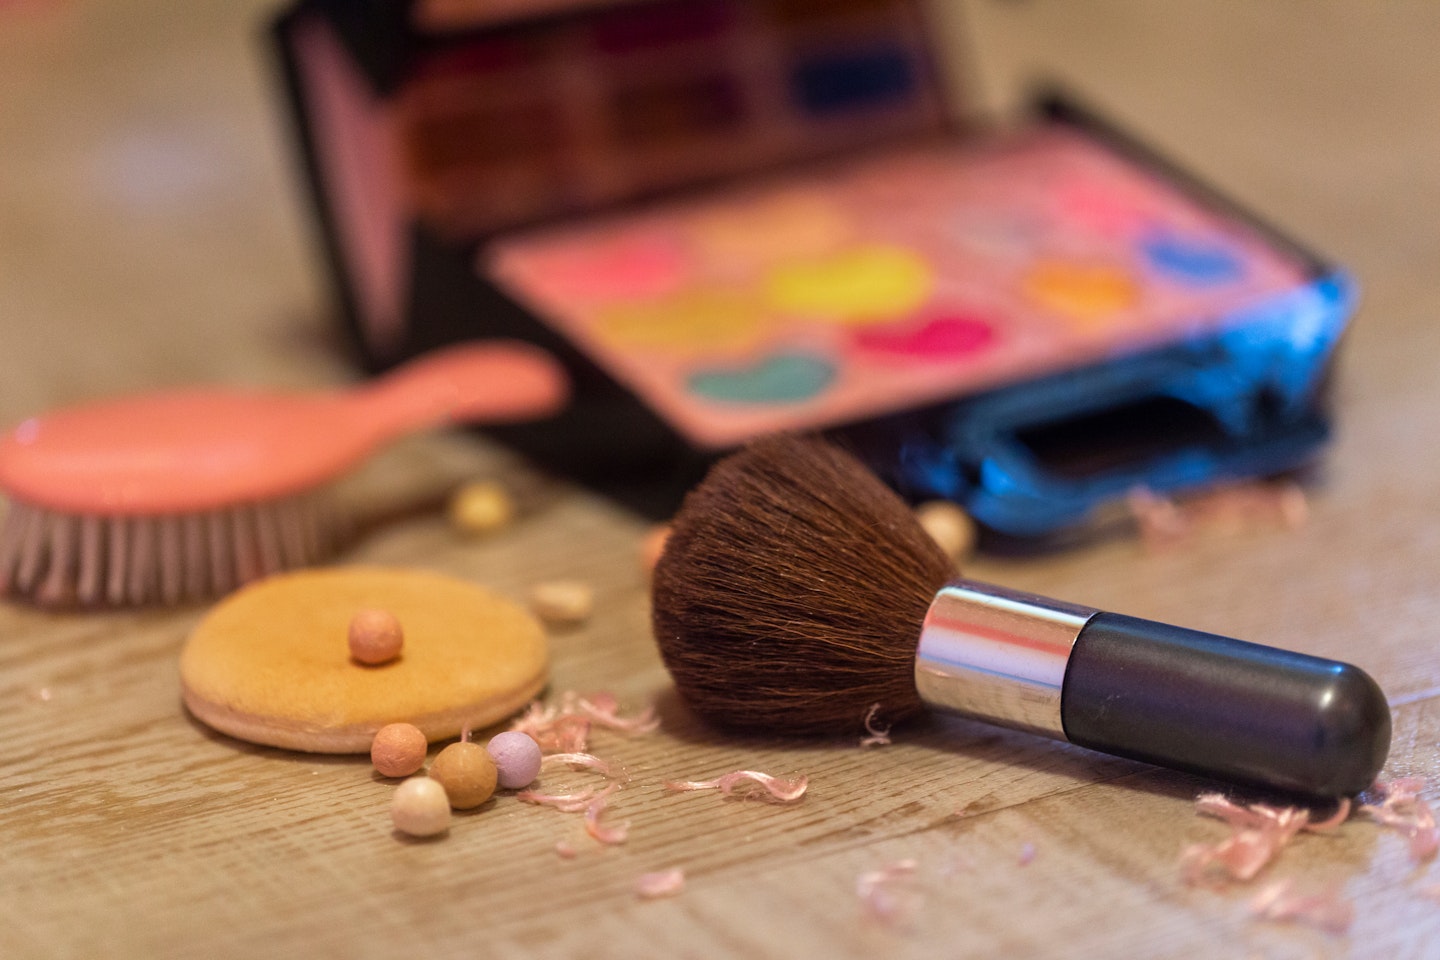 Chemicals in beauty and household products are associated with the rise in earlier puberty in girls